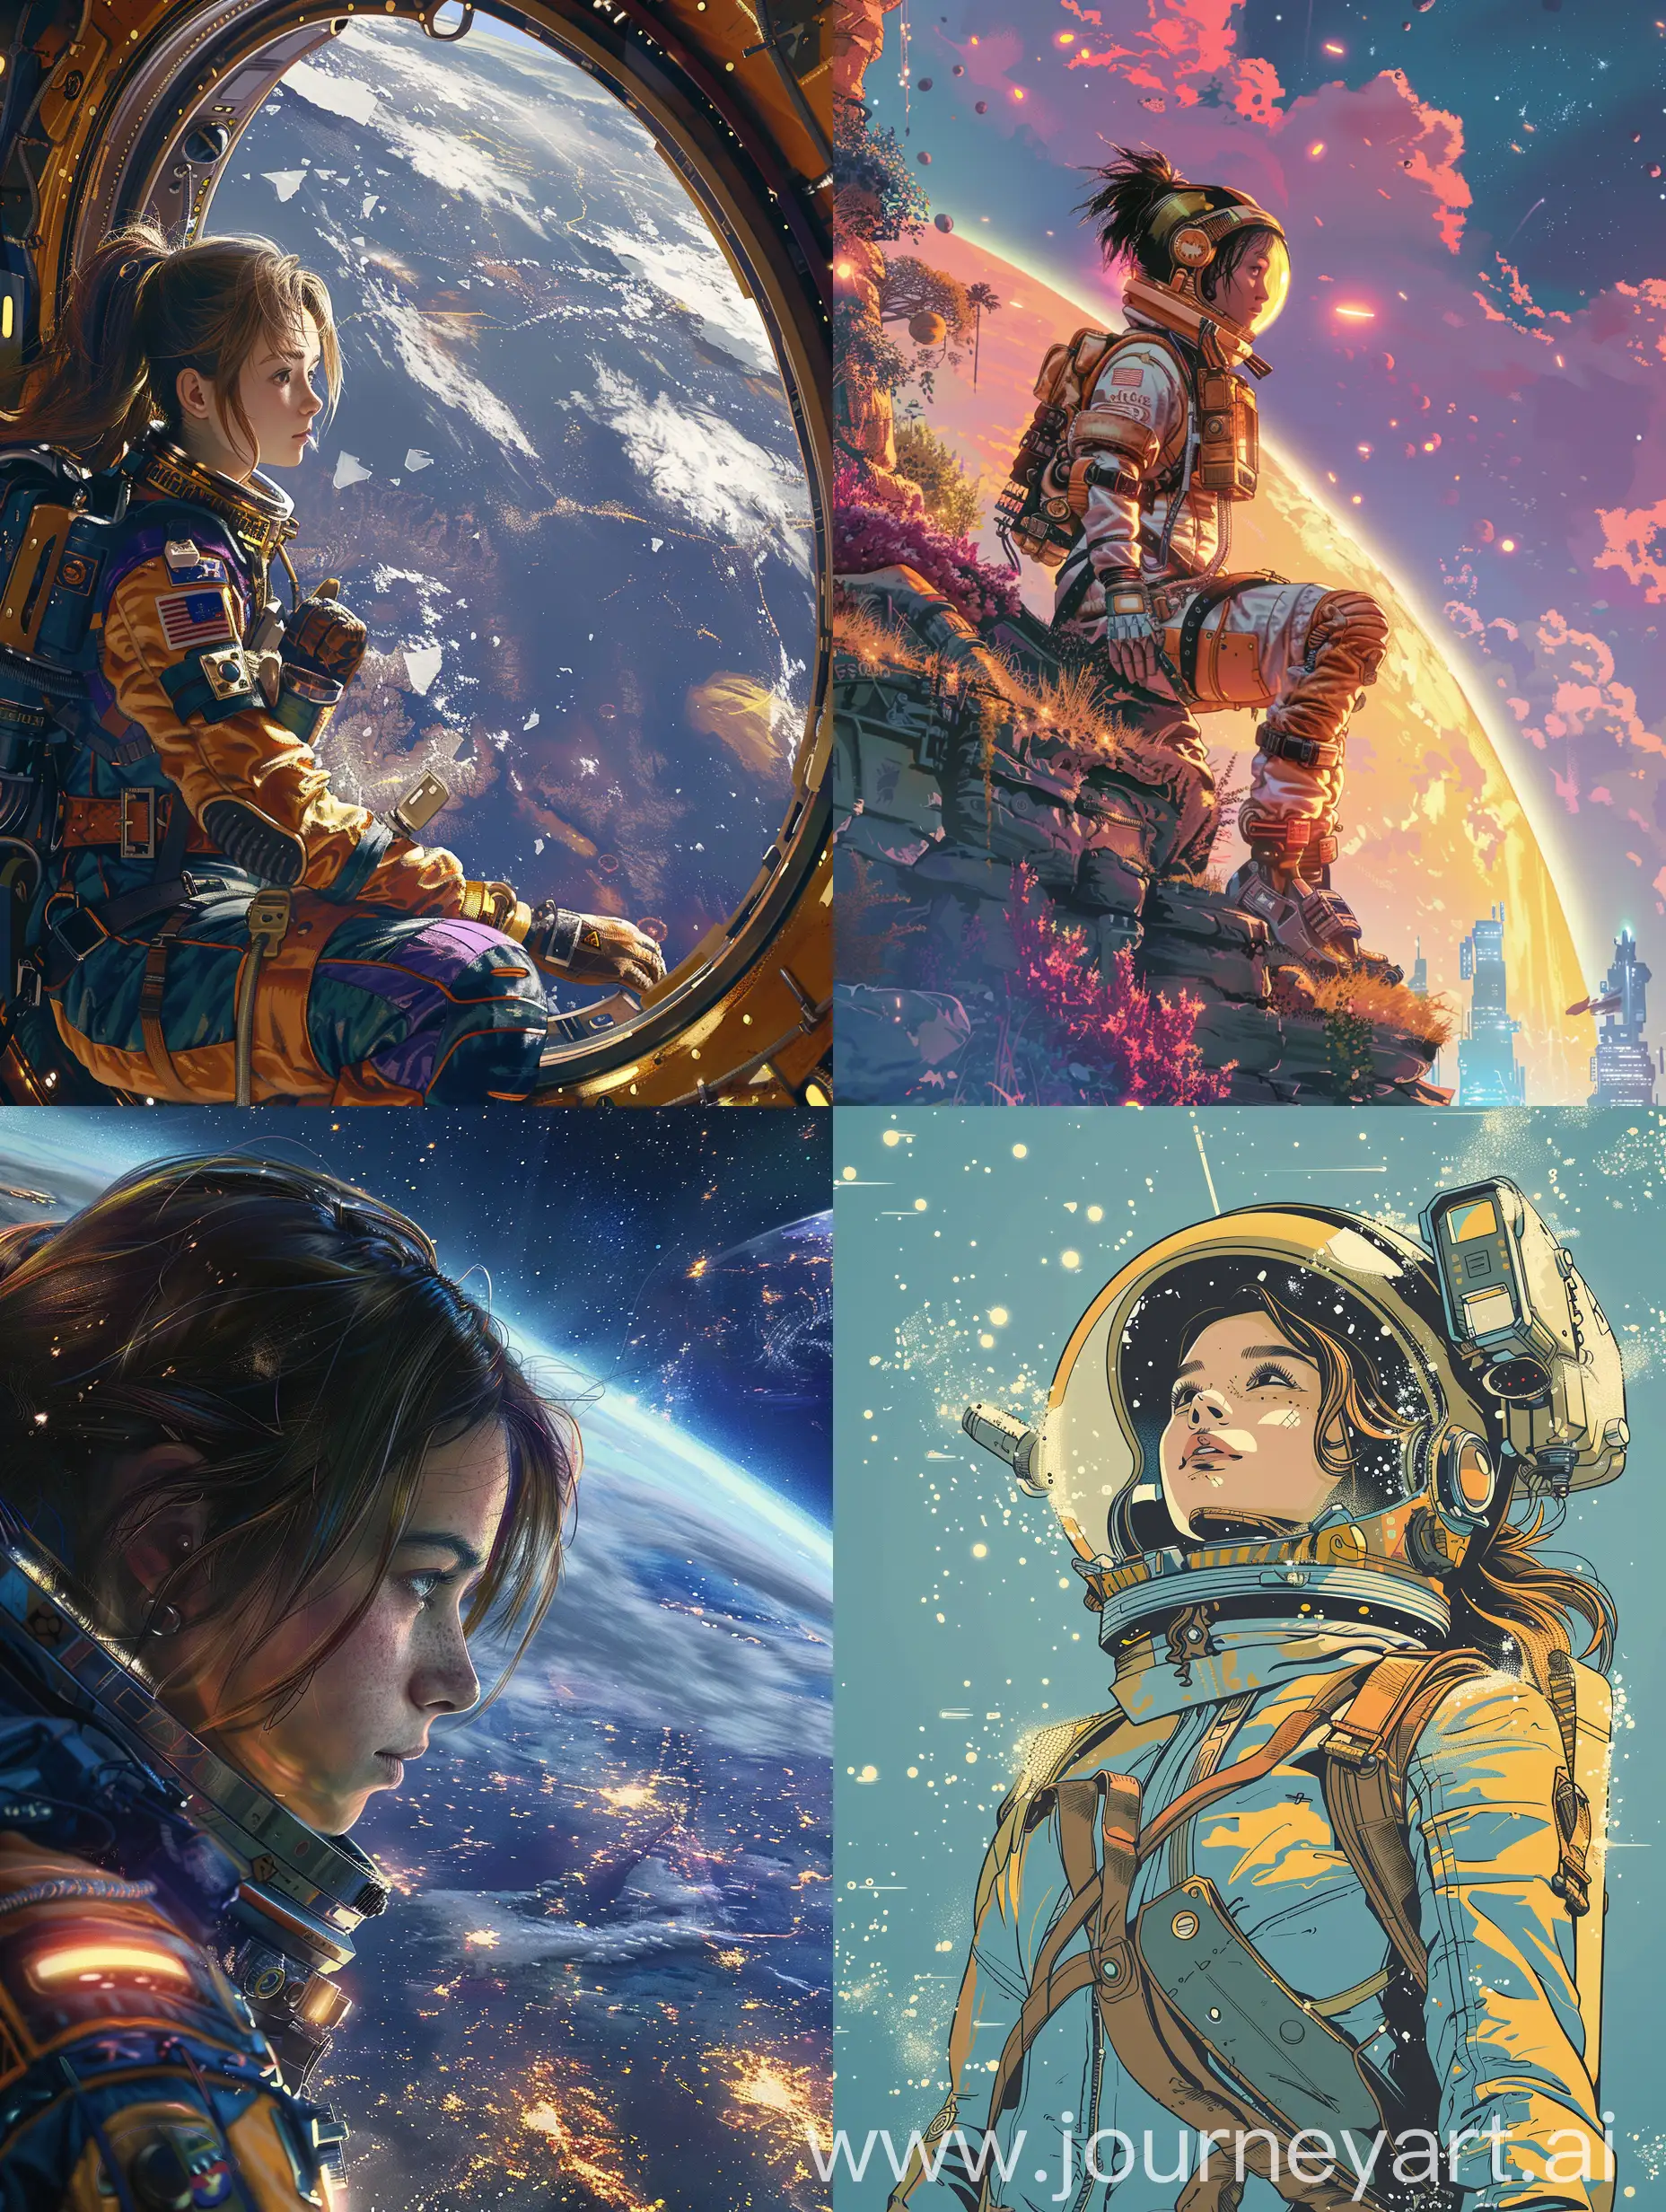 Create a visually exciting and challenging illustration in a realistic fantastic style of a beautiful young woman Space Nomad and Wanderer and asronaut longs for awesome earth. The illustration should depict a scene show grand scale, and incorporate influences from cosmoopera in comic style --s 250